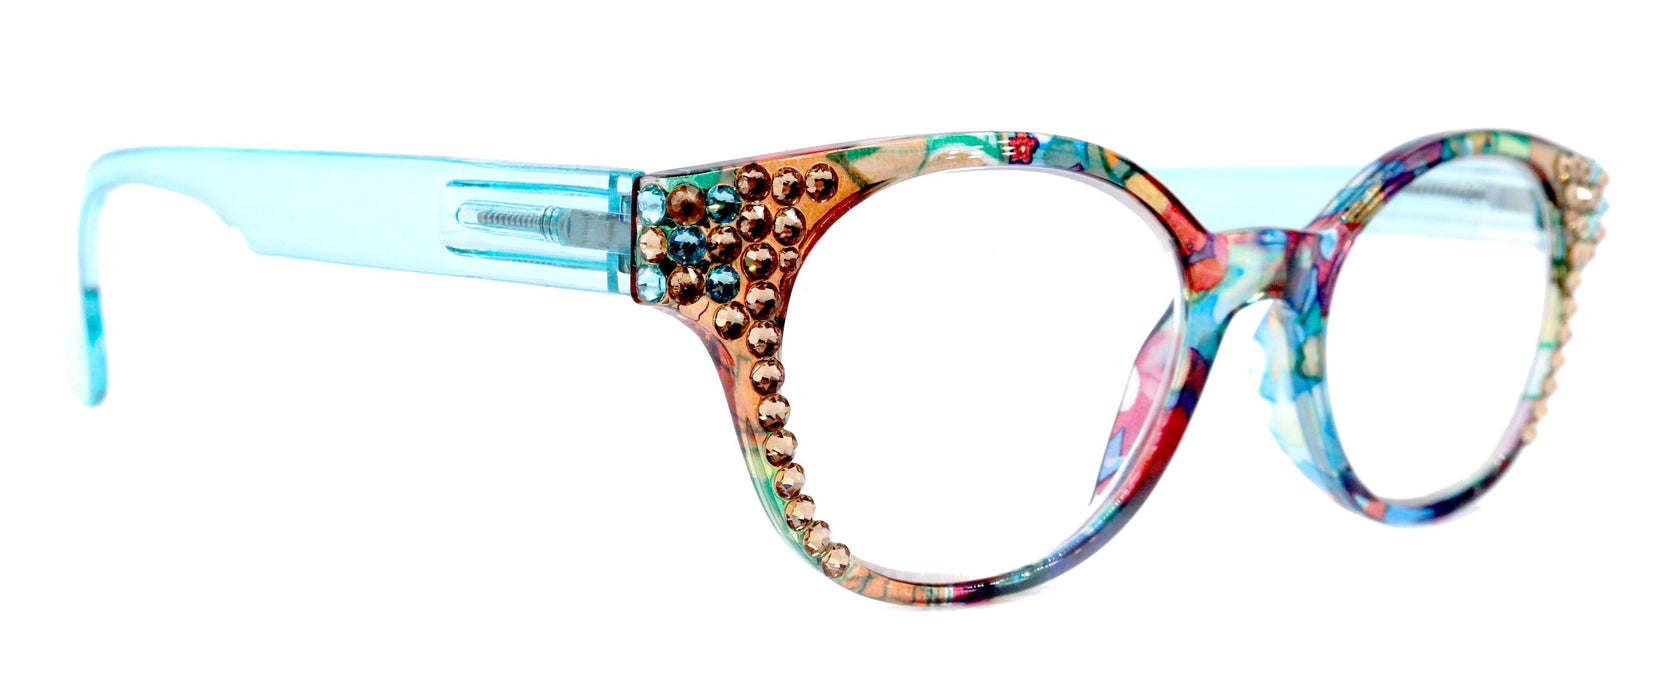 Versailles, (Bling) Reading Glasses 4 women W (Light Colorado, Aquamarine) Genuine European Crystals (Blue, Pink Clear) NY Fifth Avenue